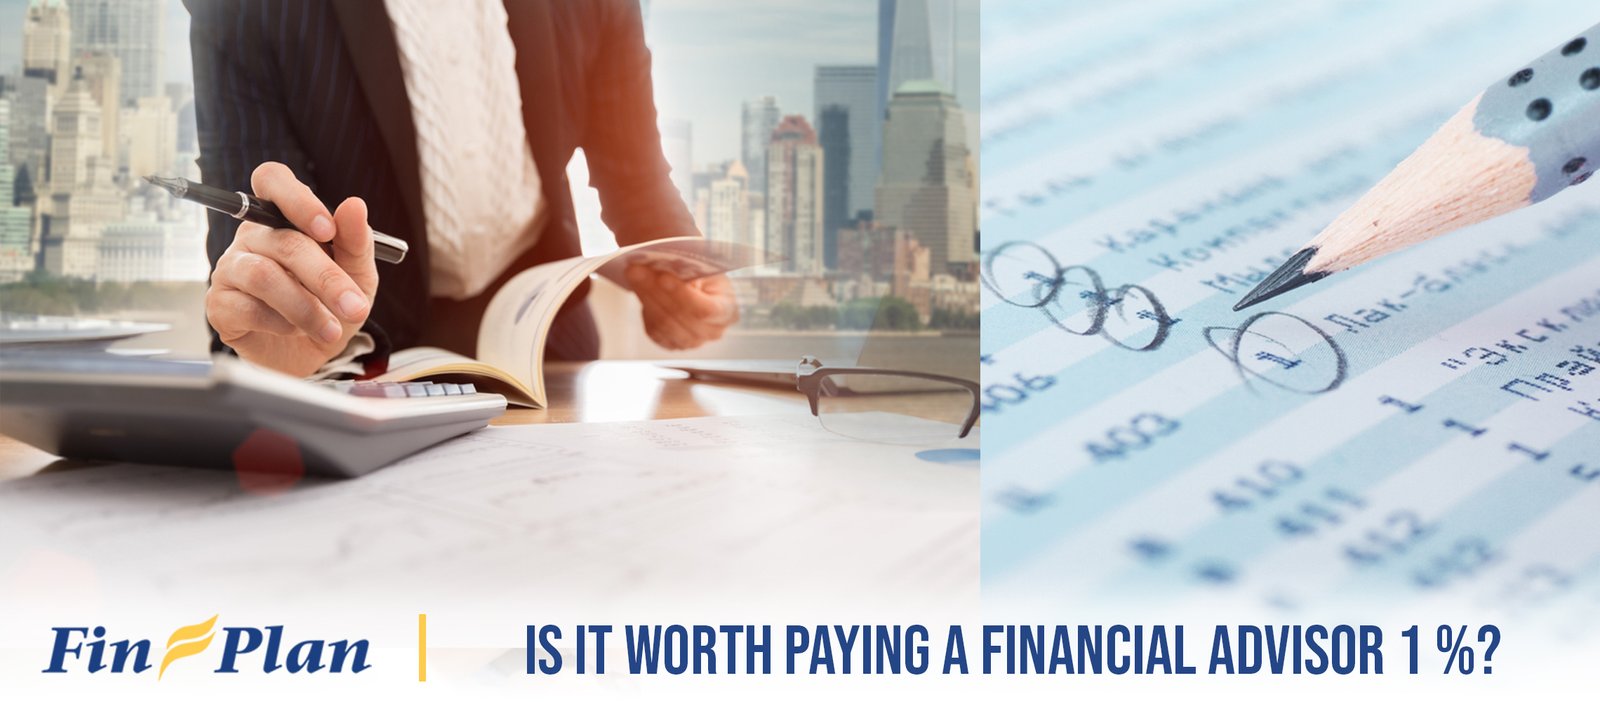 Is it Worth Paying a Financial Advisor 1 % - Fin Plan